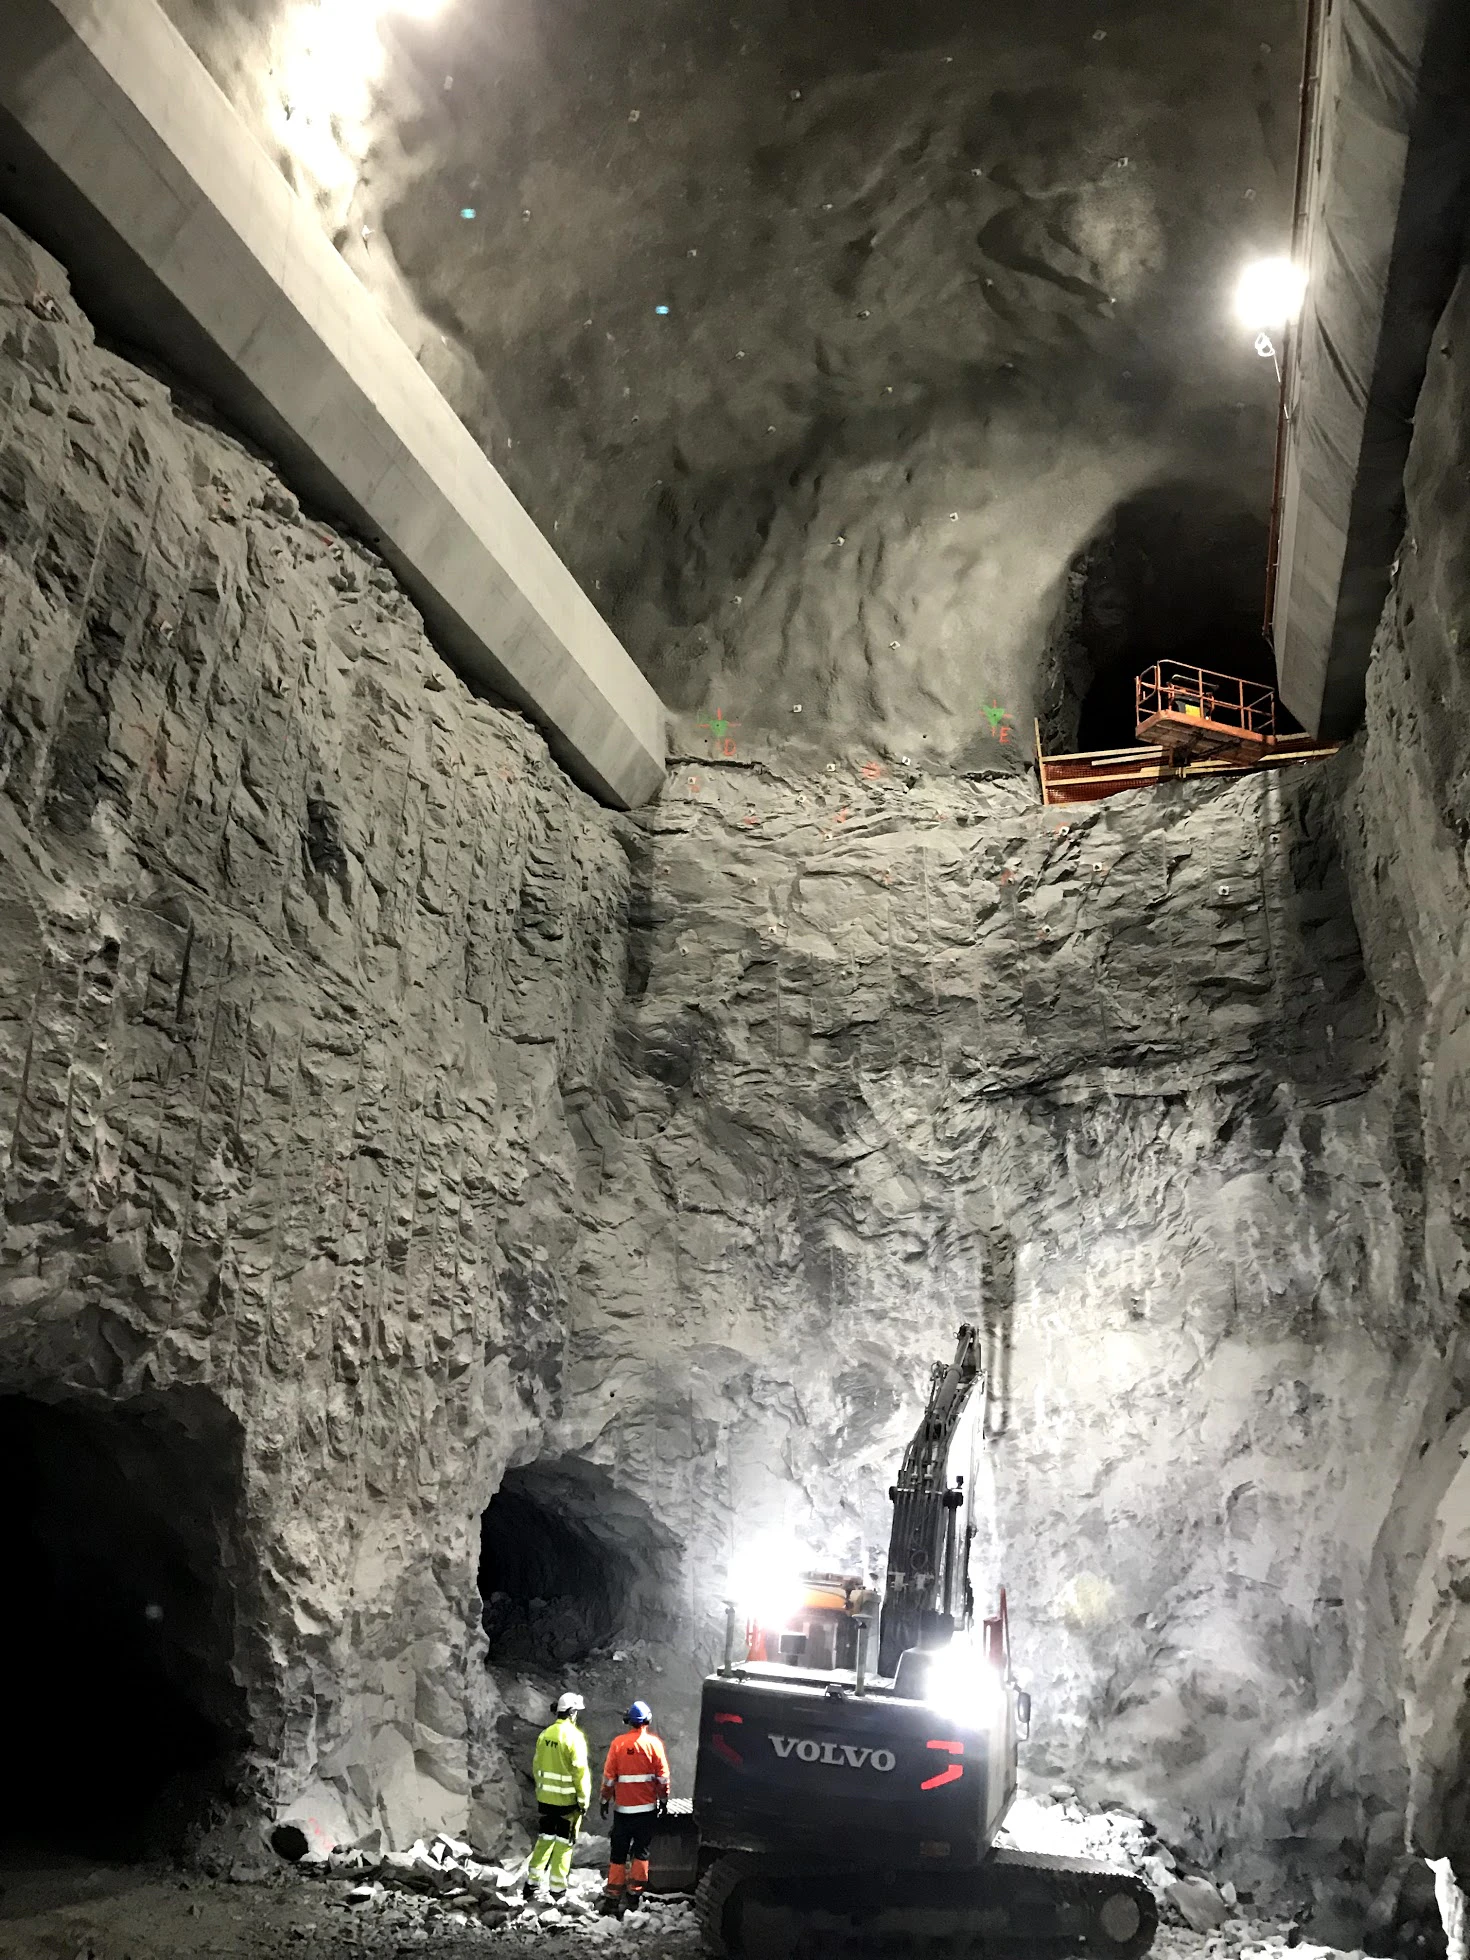 Construction activity taking place as part of a tunnel excavation.